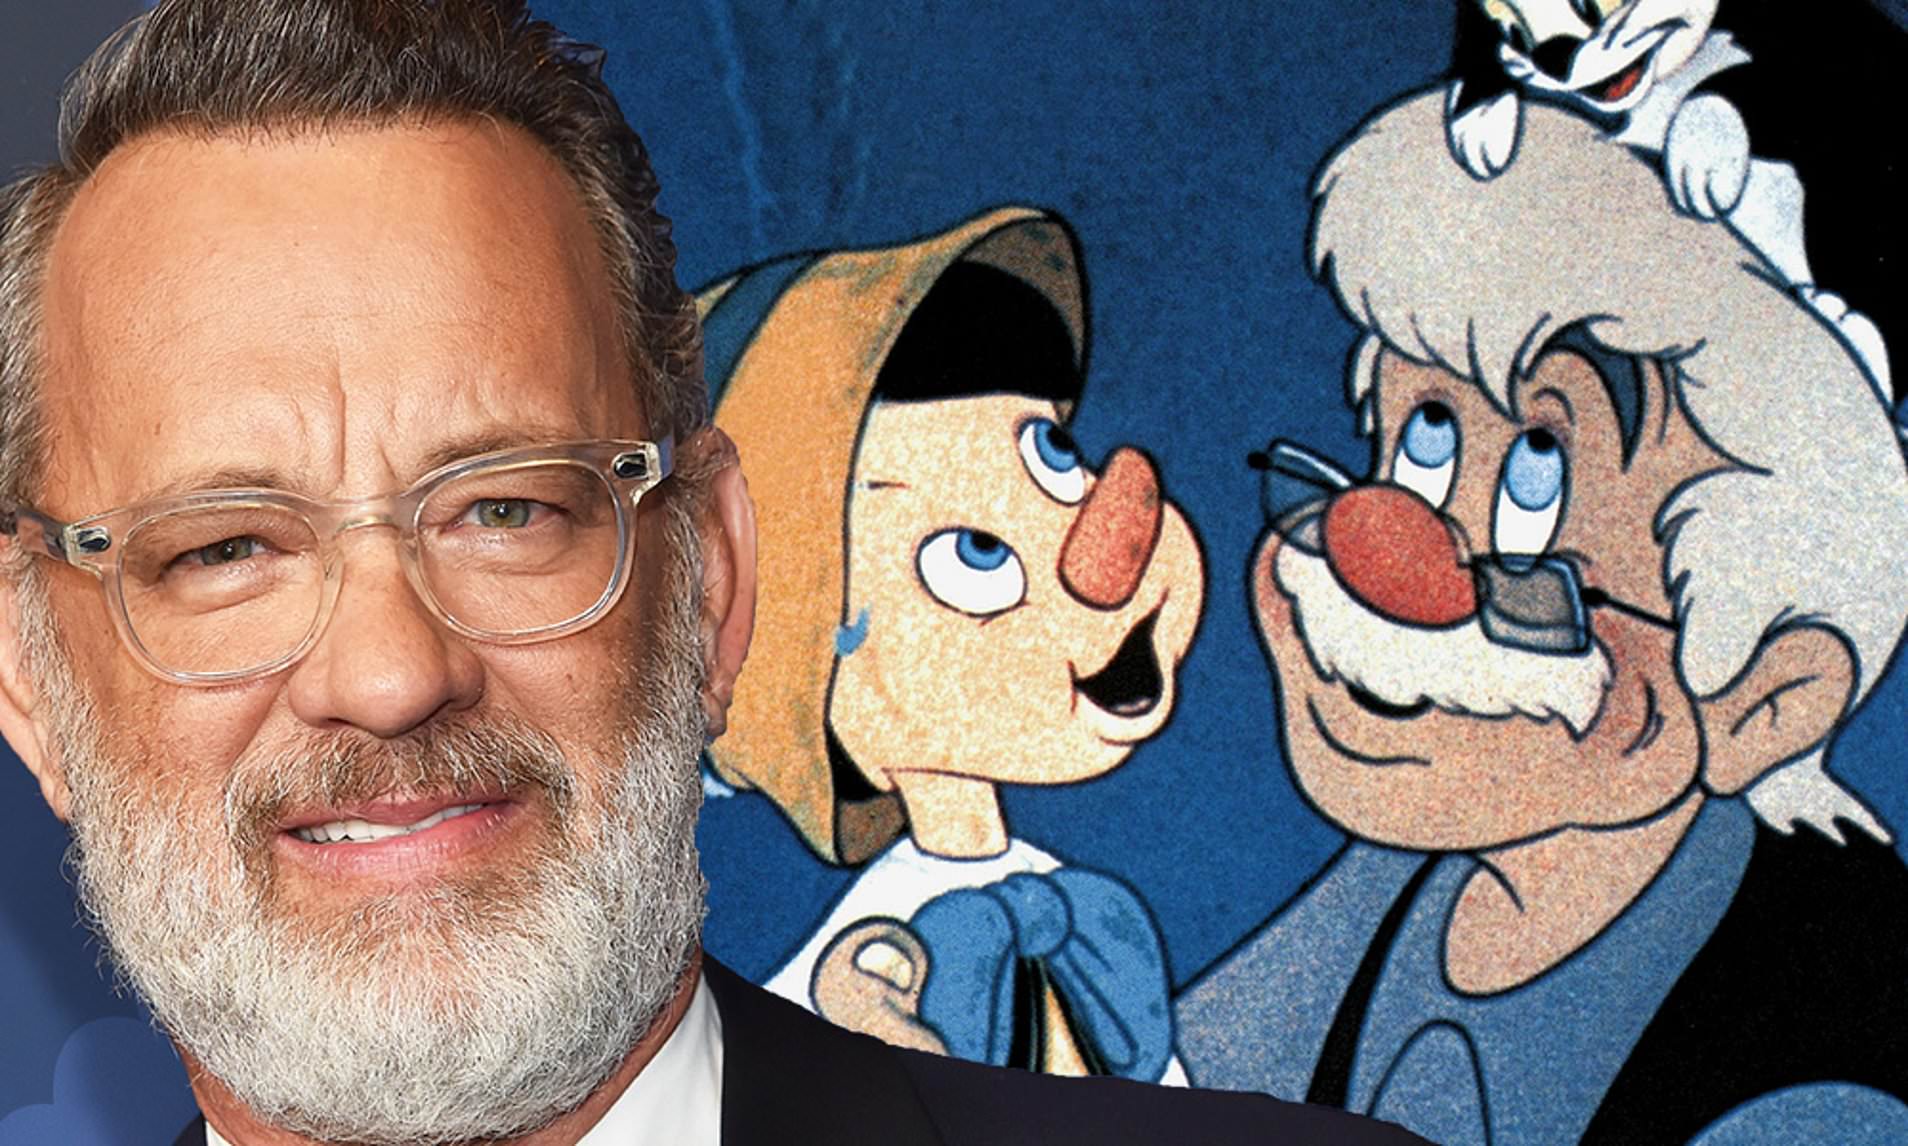 https://www.dailymail.co.uk/tvshowbiz/article-8597823/Tom-Hanks-early-negotiations-play-Geppetto-Disneys-live-action-remake-Pinocchio.html